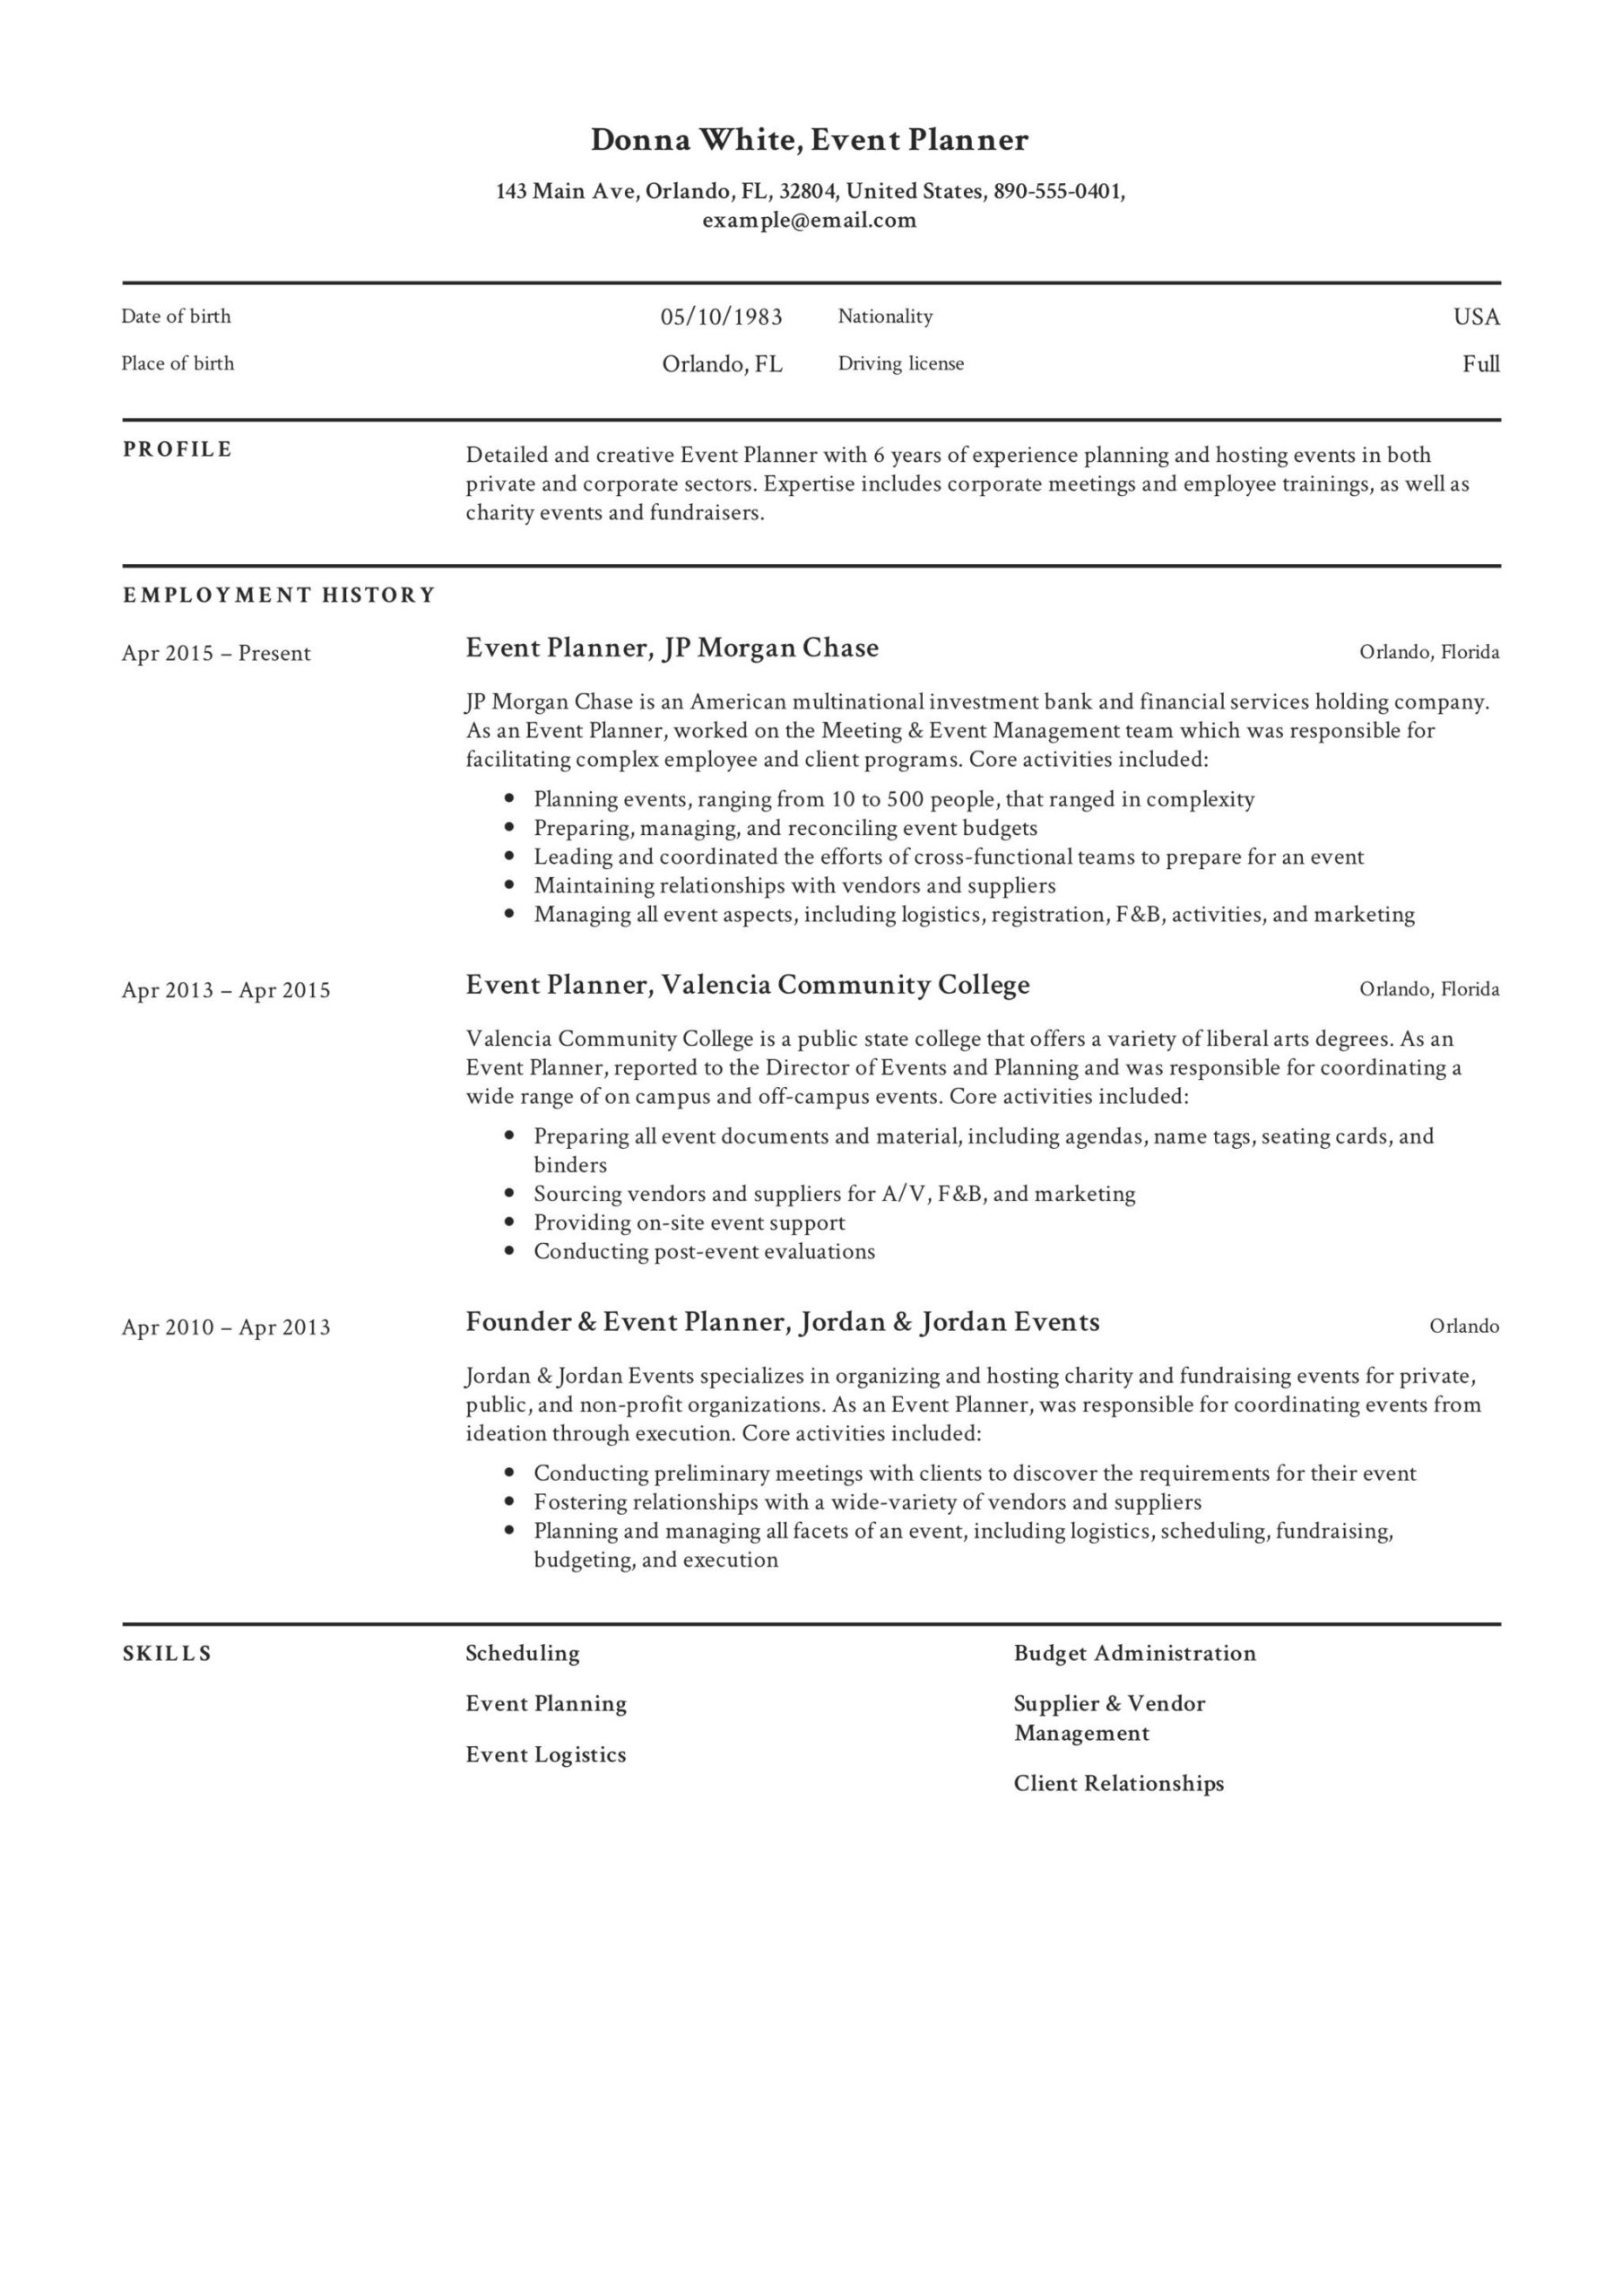 Sample Of Good Meeting Planner Resume Guide: event Planner Resume 12 Templates Pdf 2022